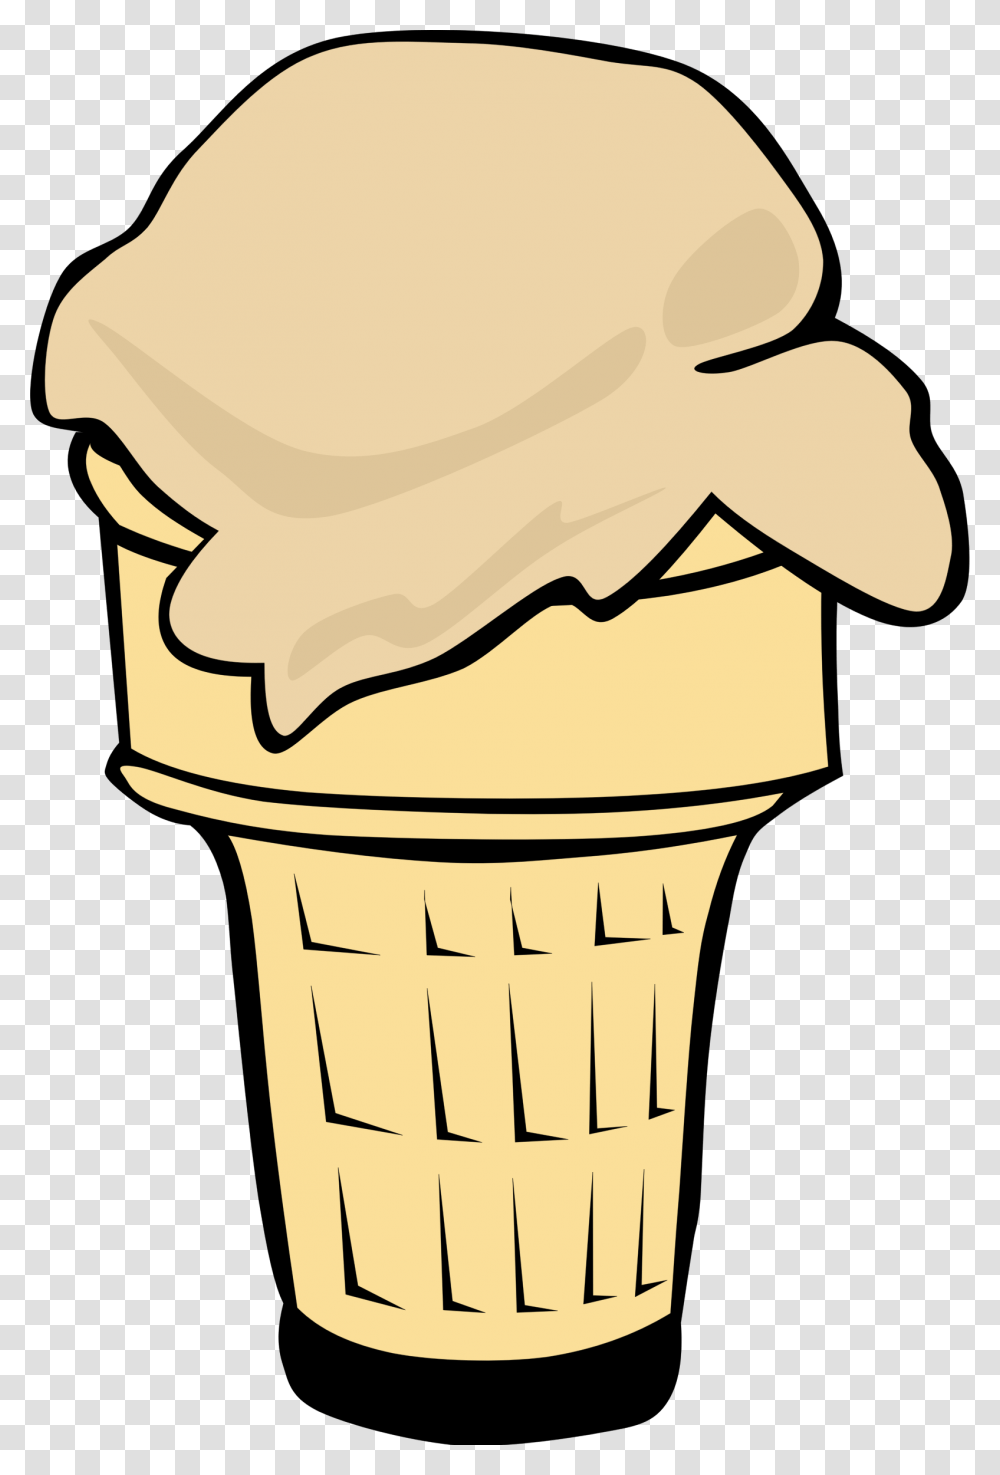 Ice Cream Clipart Single Free Clipart On Dumielauxepices Inside, Dessert, Food, Creme Transparent Png